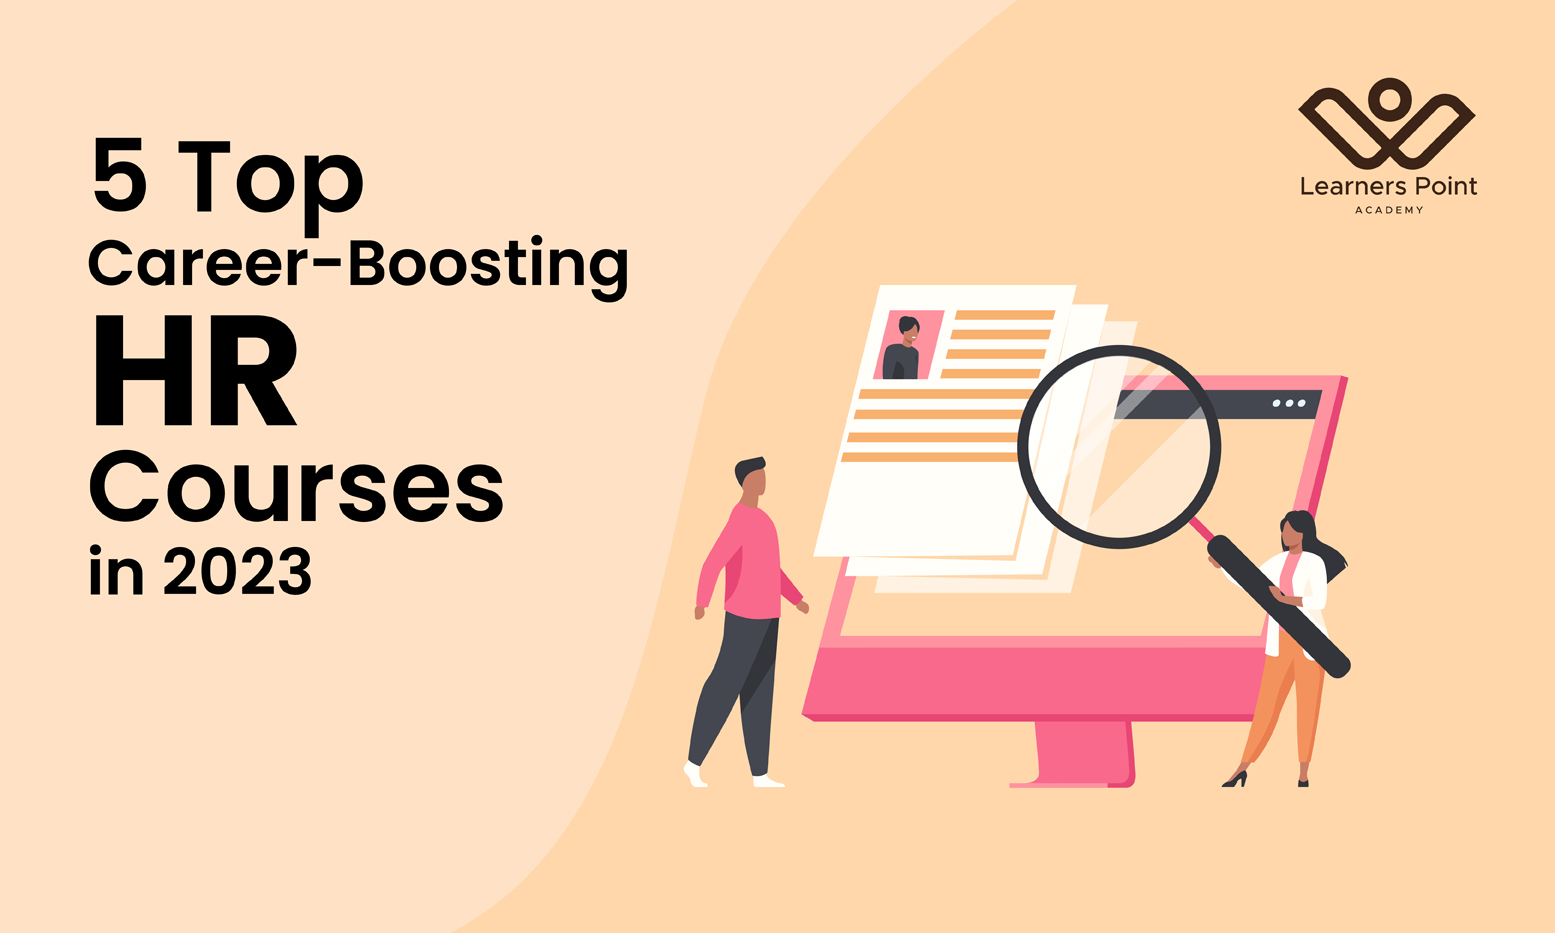 5 Top Career-Boosting HR Courses for 2023